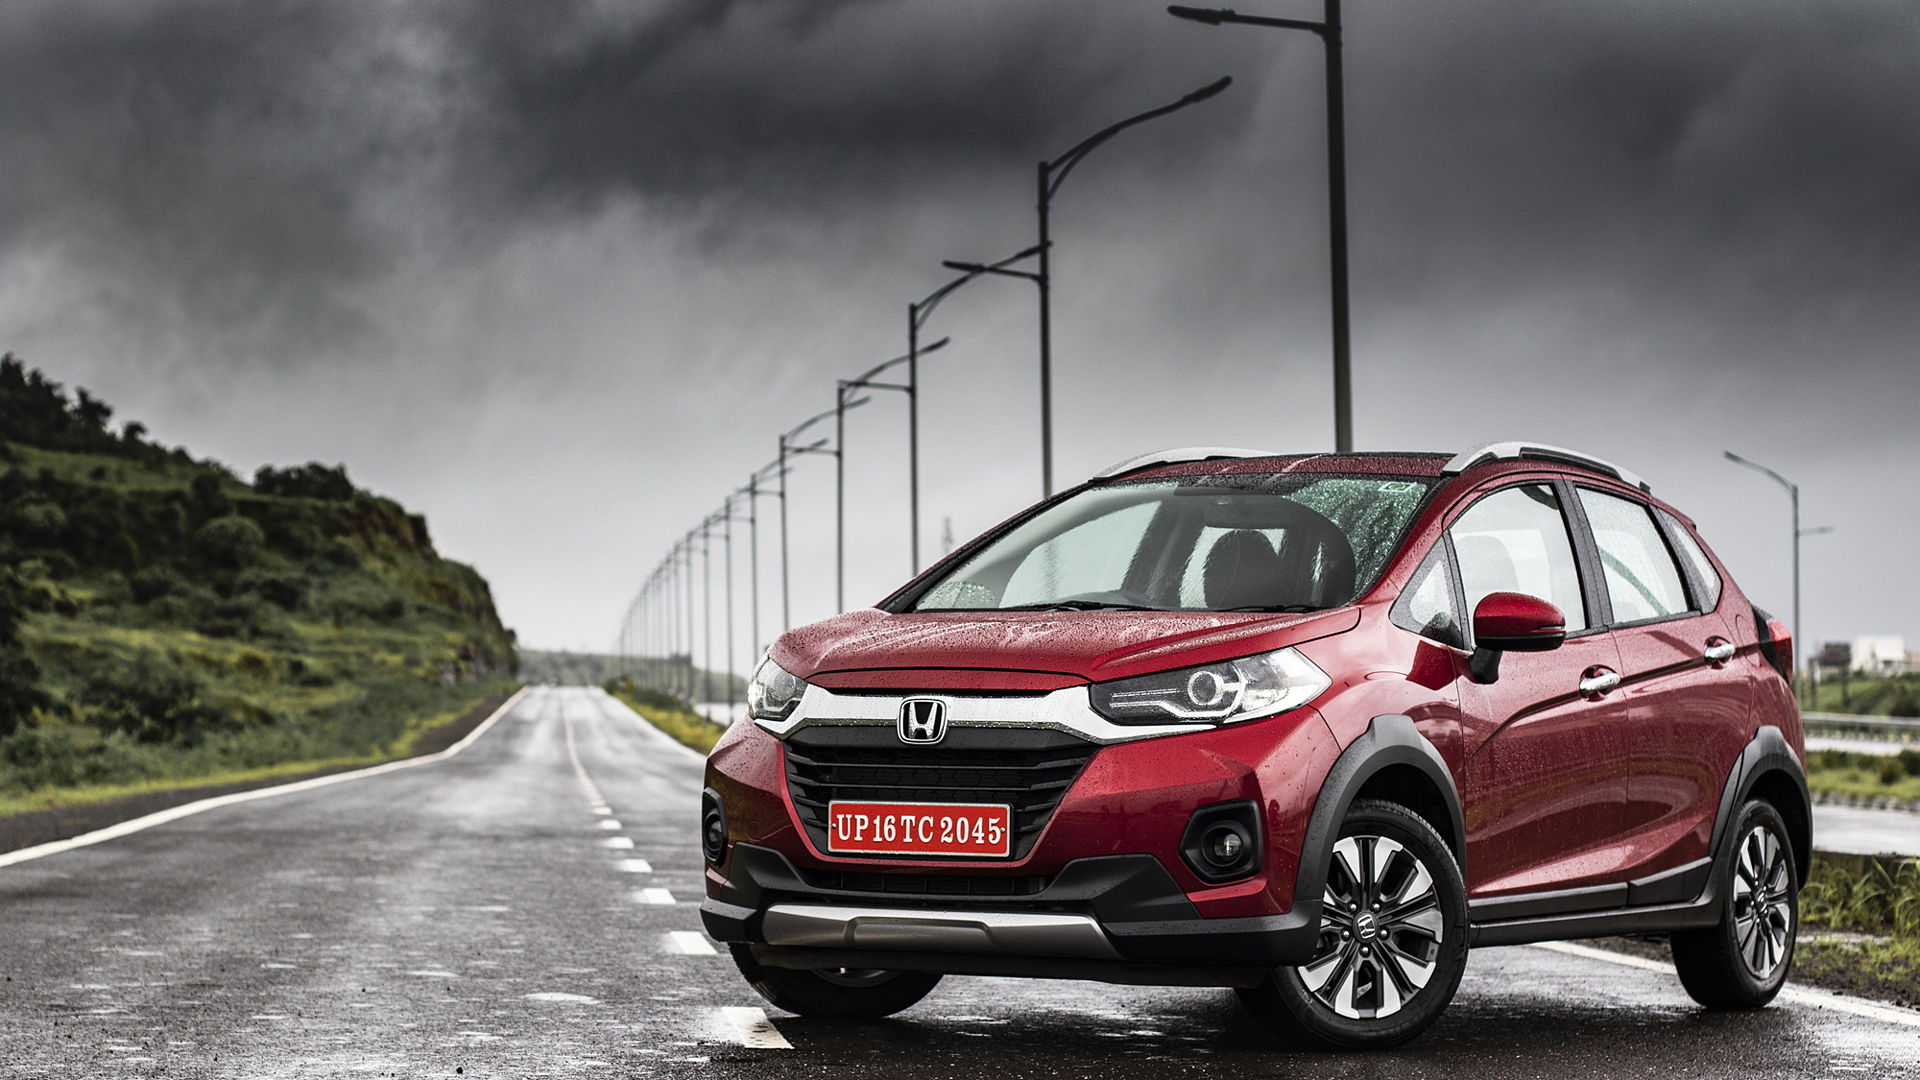 Honda Wr V Sv Mt Petrol Price In India Features Specs And Reviews Carwale